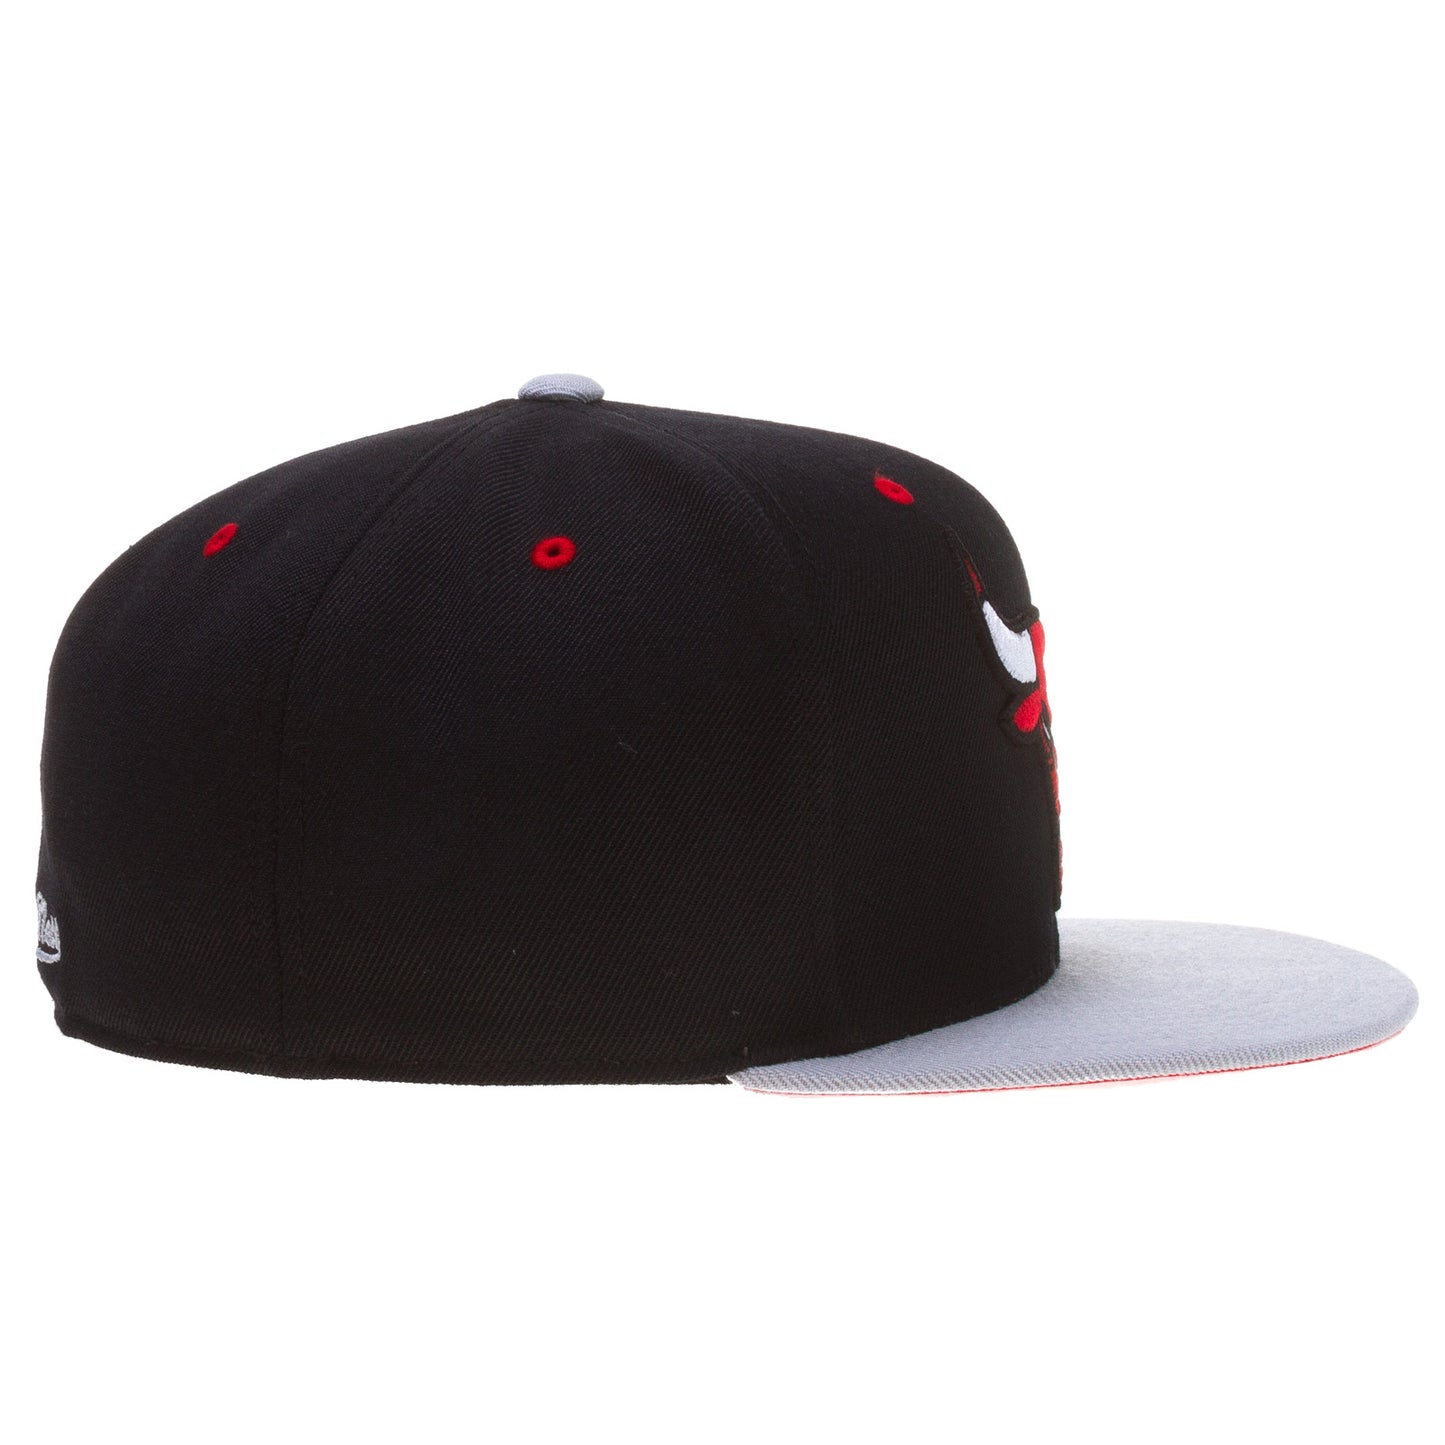 Chicago Bulls Black and Grey Fitted Hat